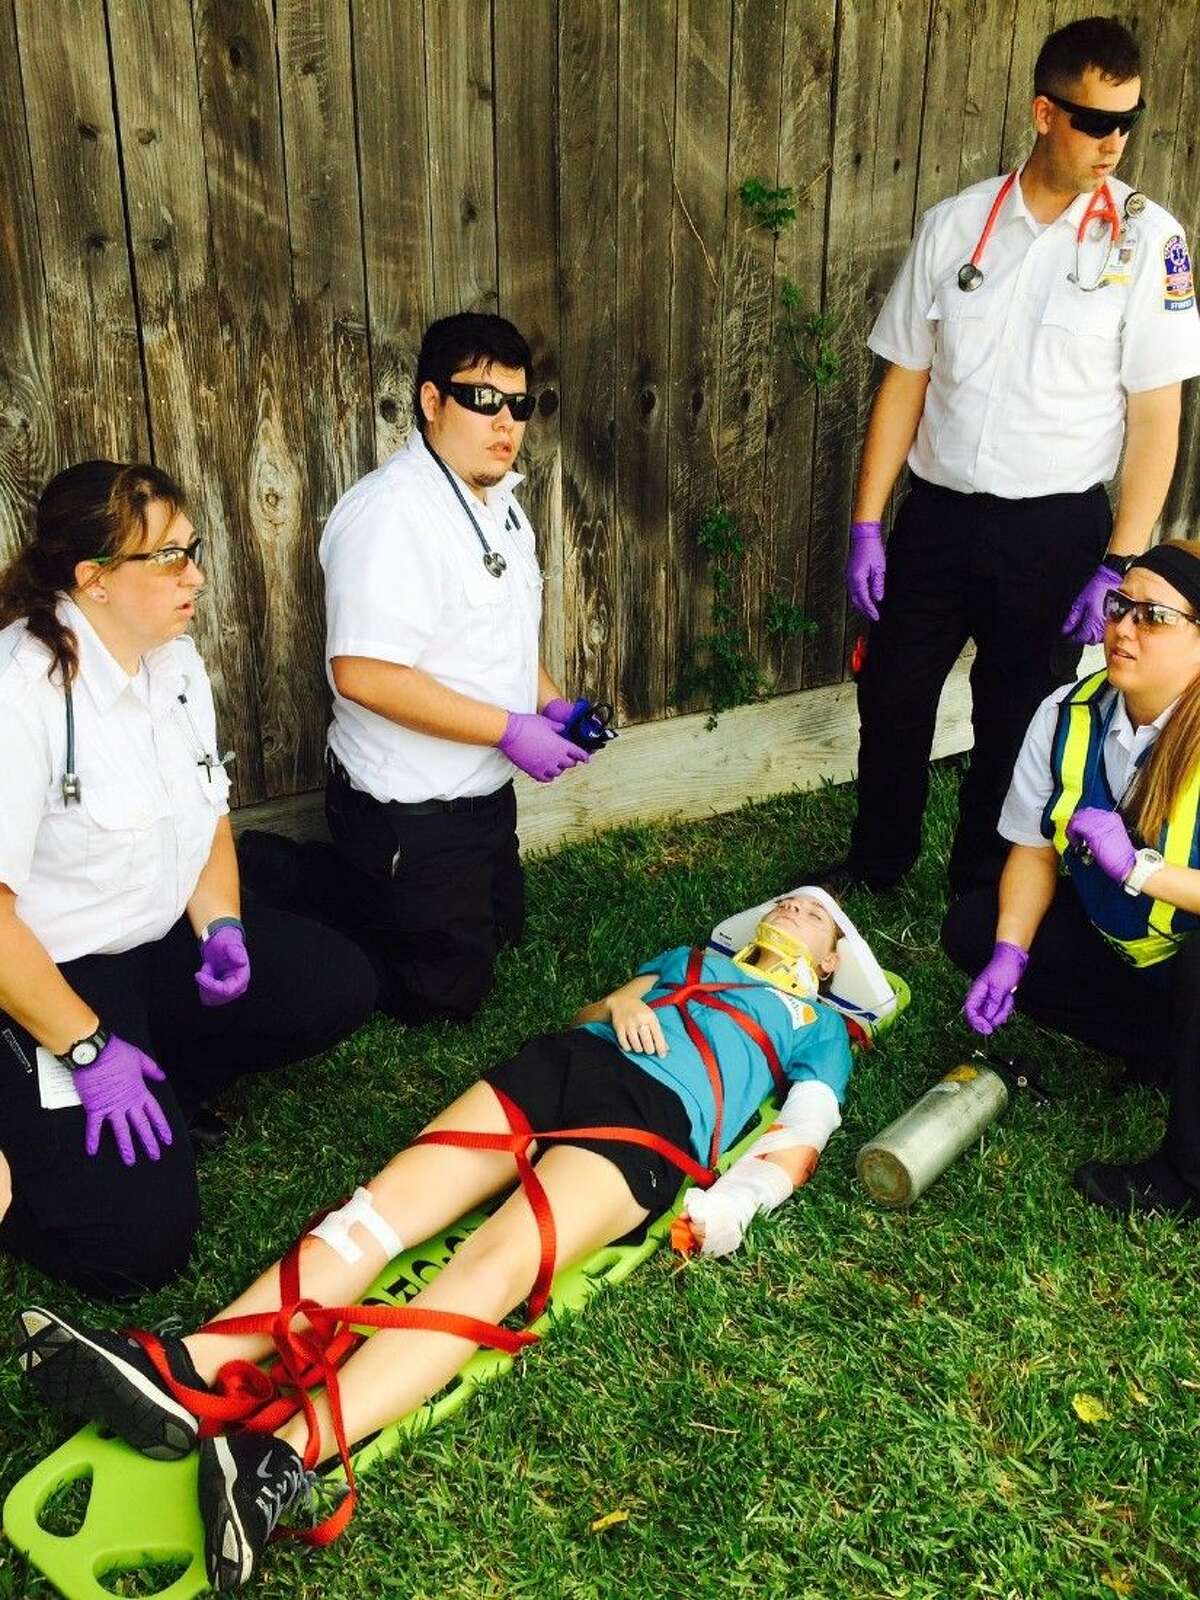 Students had to work through six different mass casualty simulations. In the picture above students are giving medical treatment to a person injured from being hit by a car while on a motorized scooter.